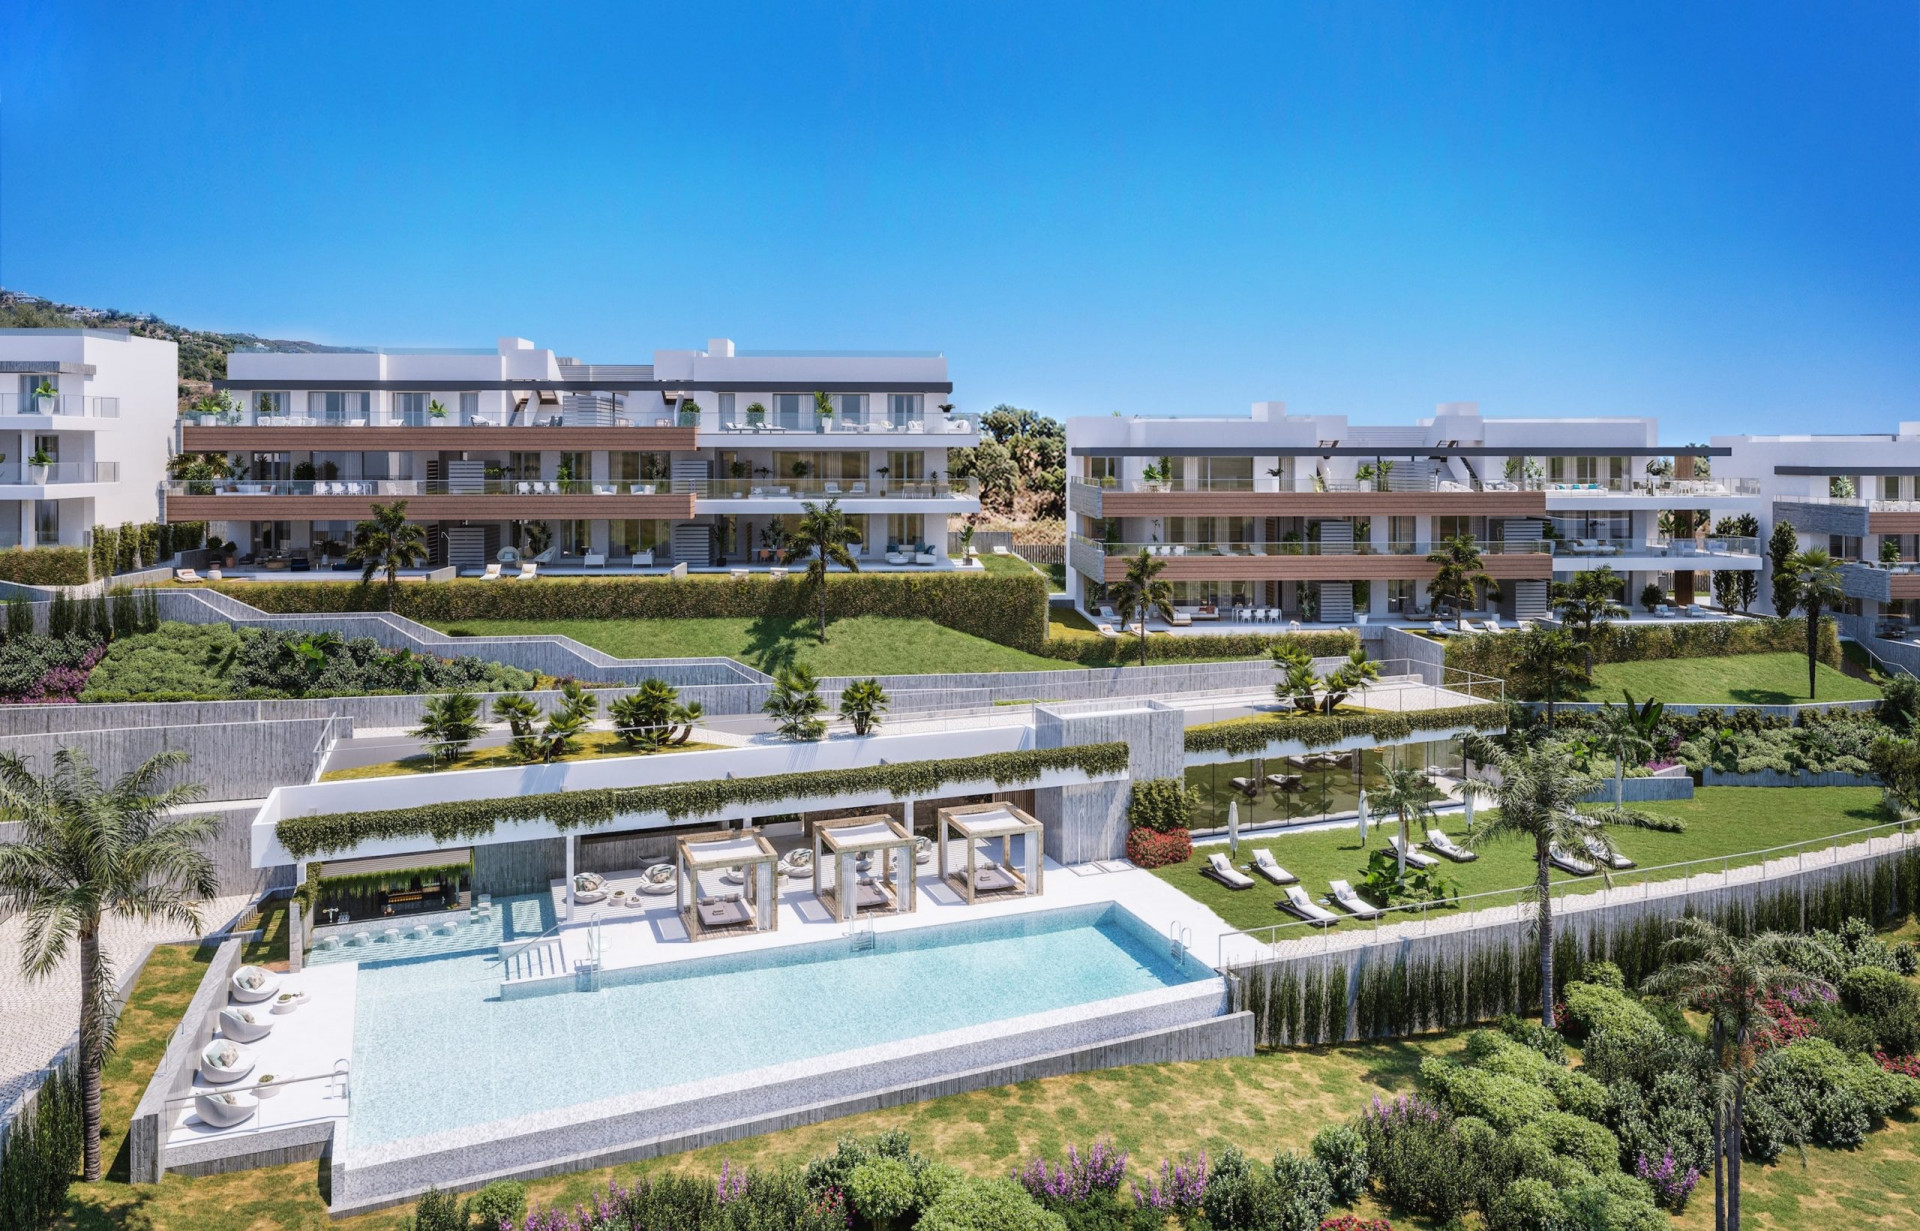 Three bedroom penthouse with solarium and panoramic views of the coastline east of Marbella. | Image 2